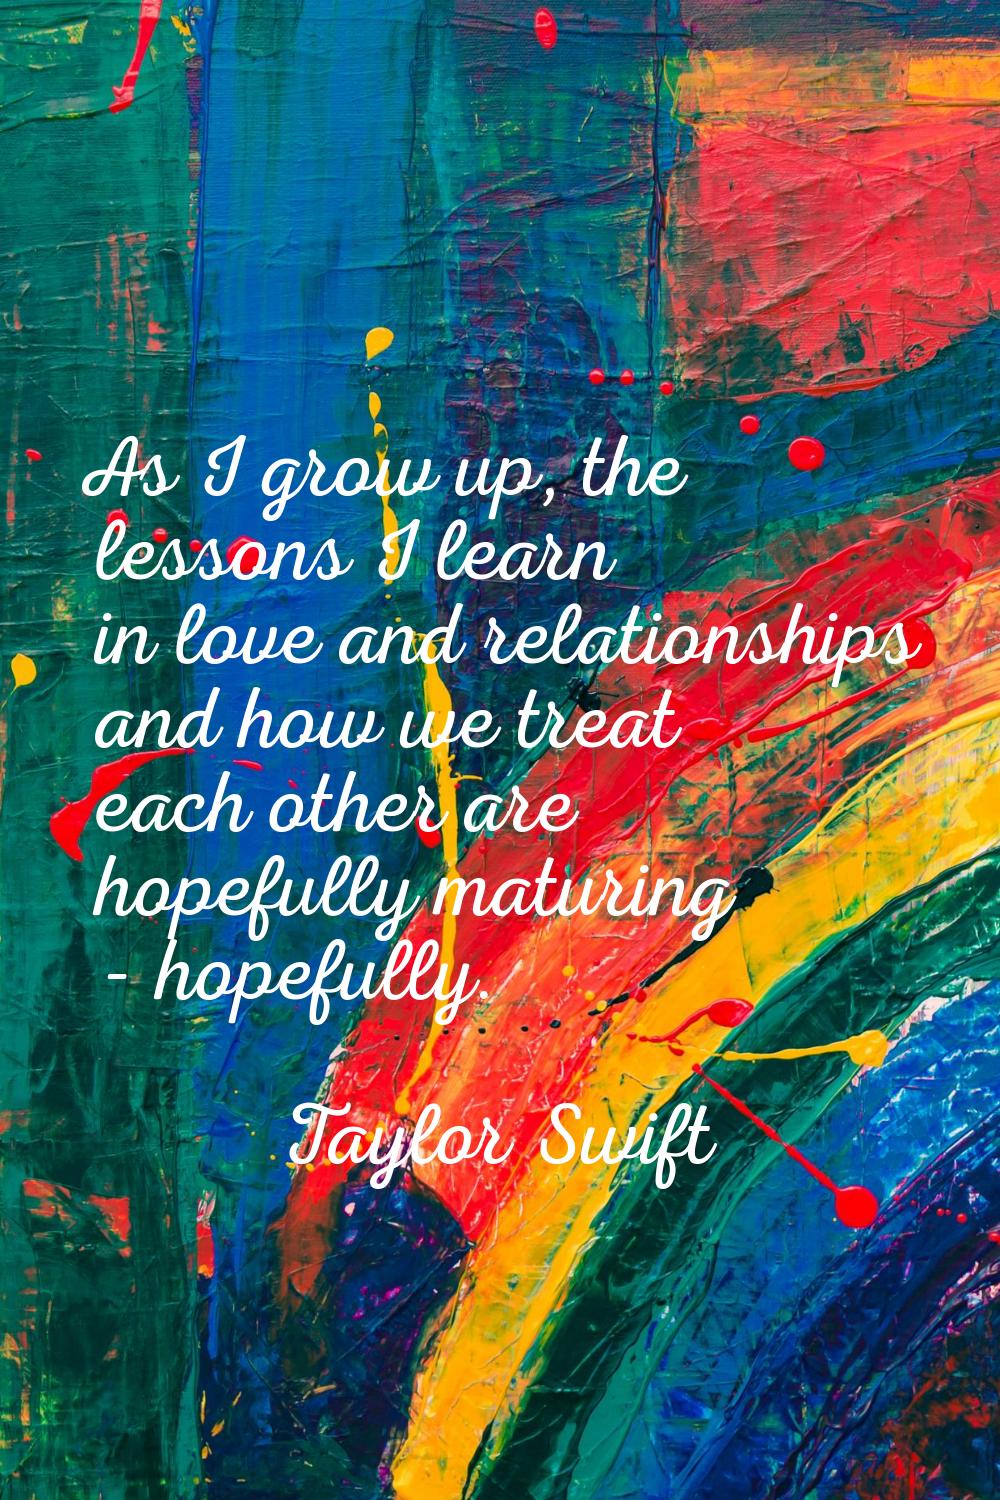 As I grow up, the lessons I learn in love and relationships and how we treat each other are hopeful